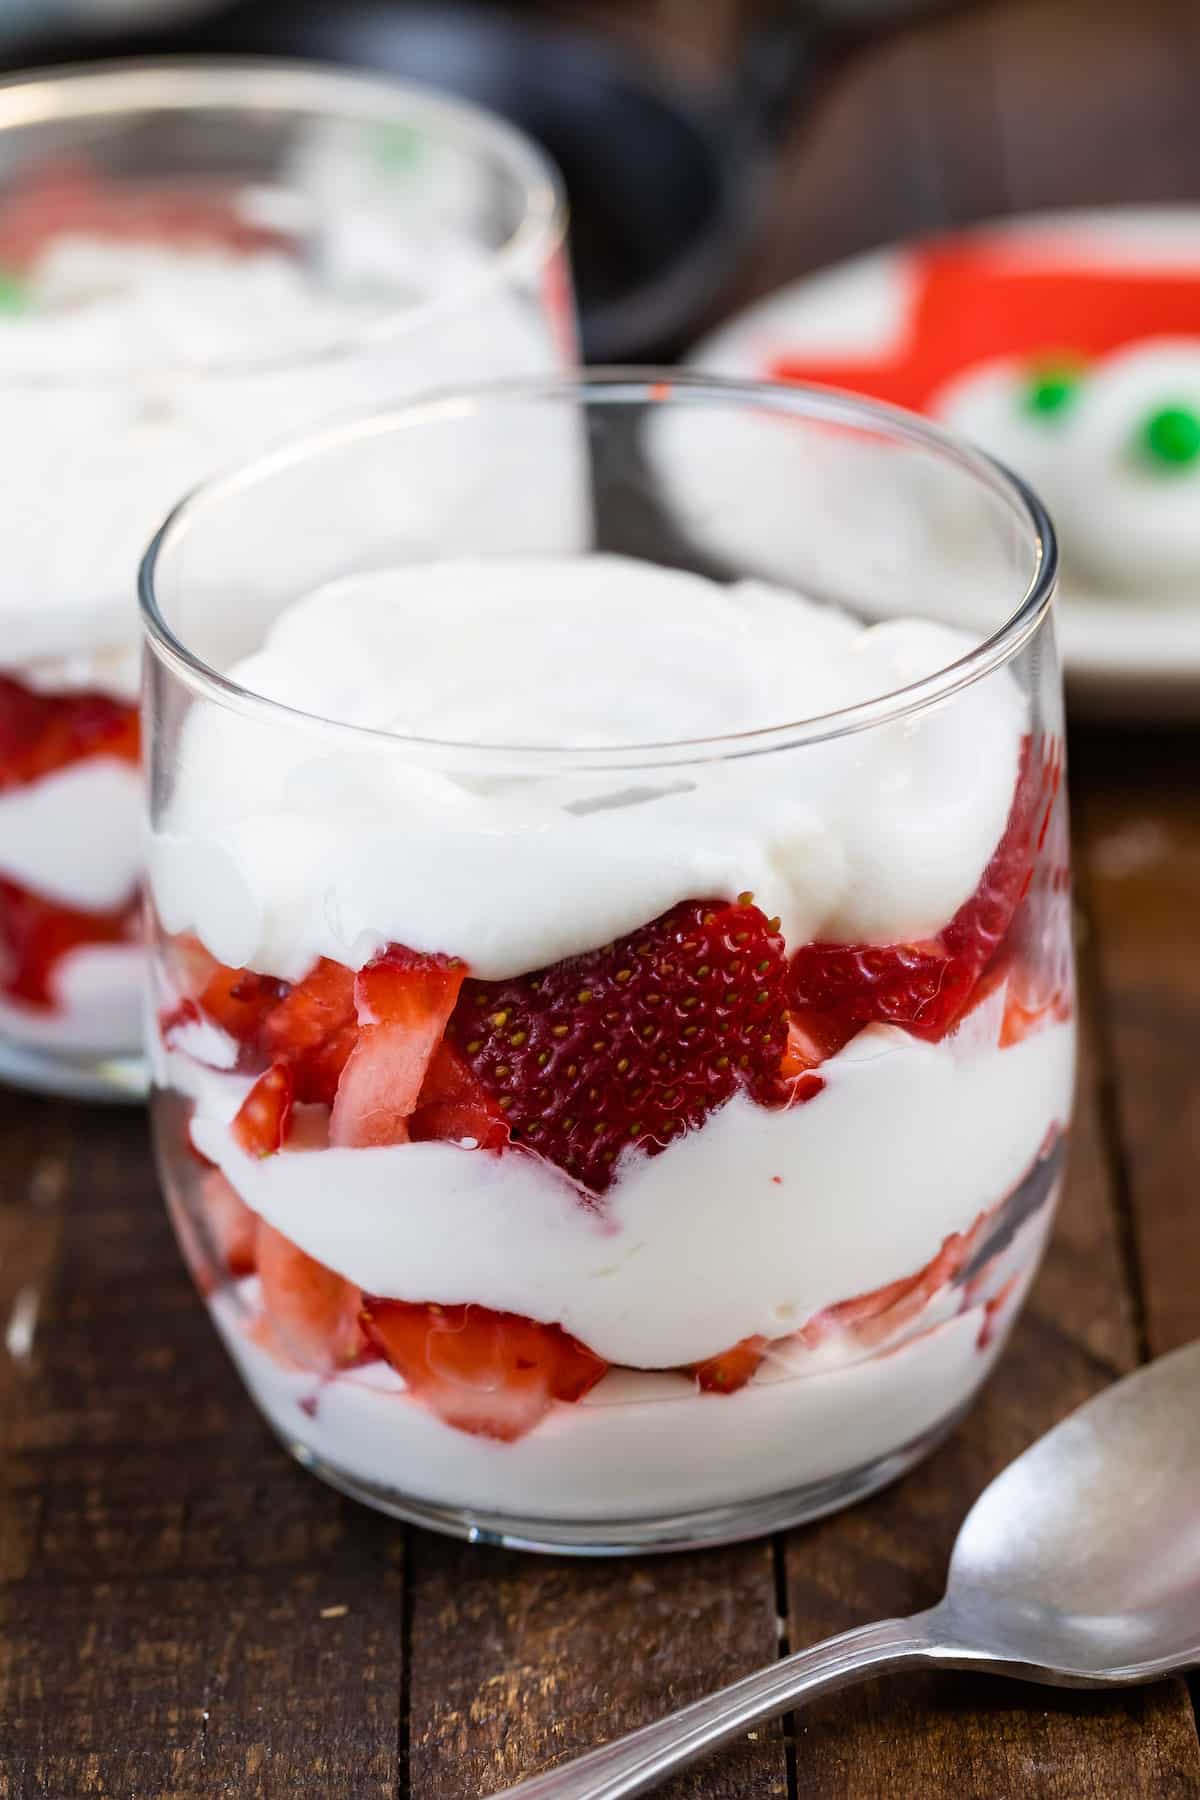 cream and strawberries parfait in a clear class.